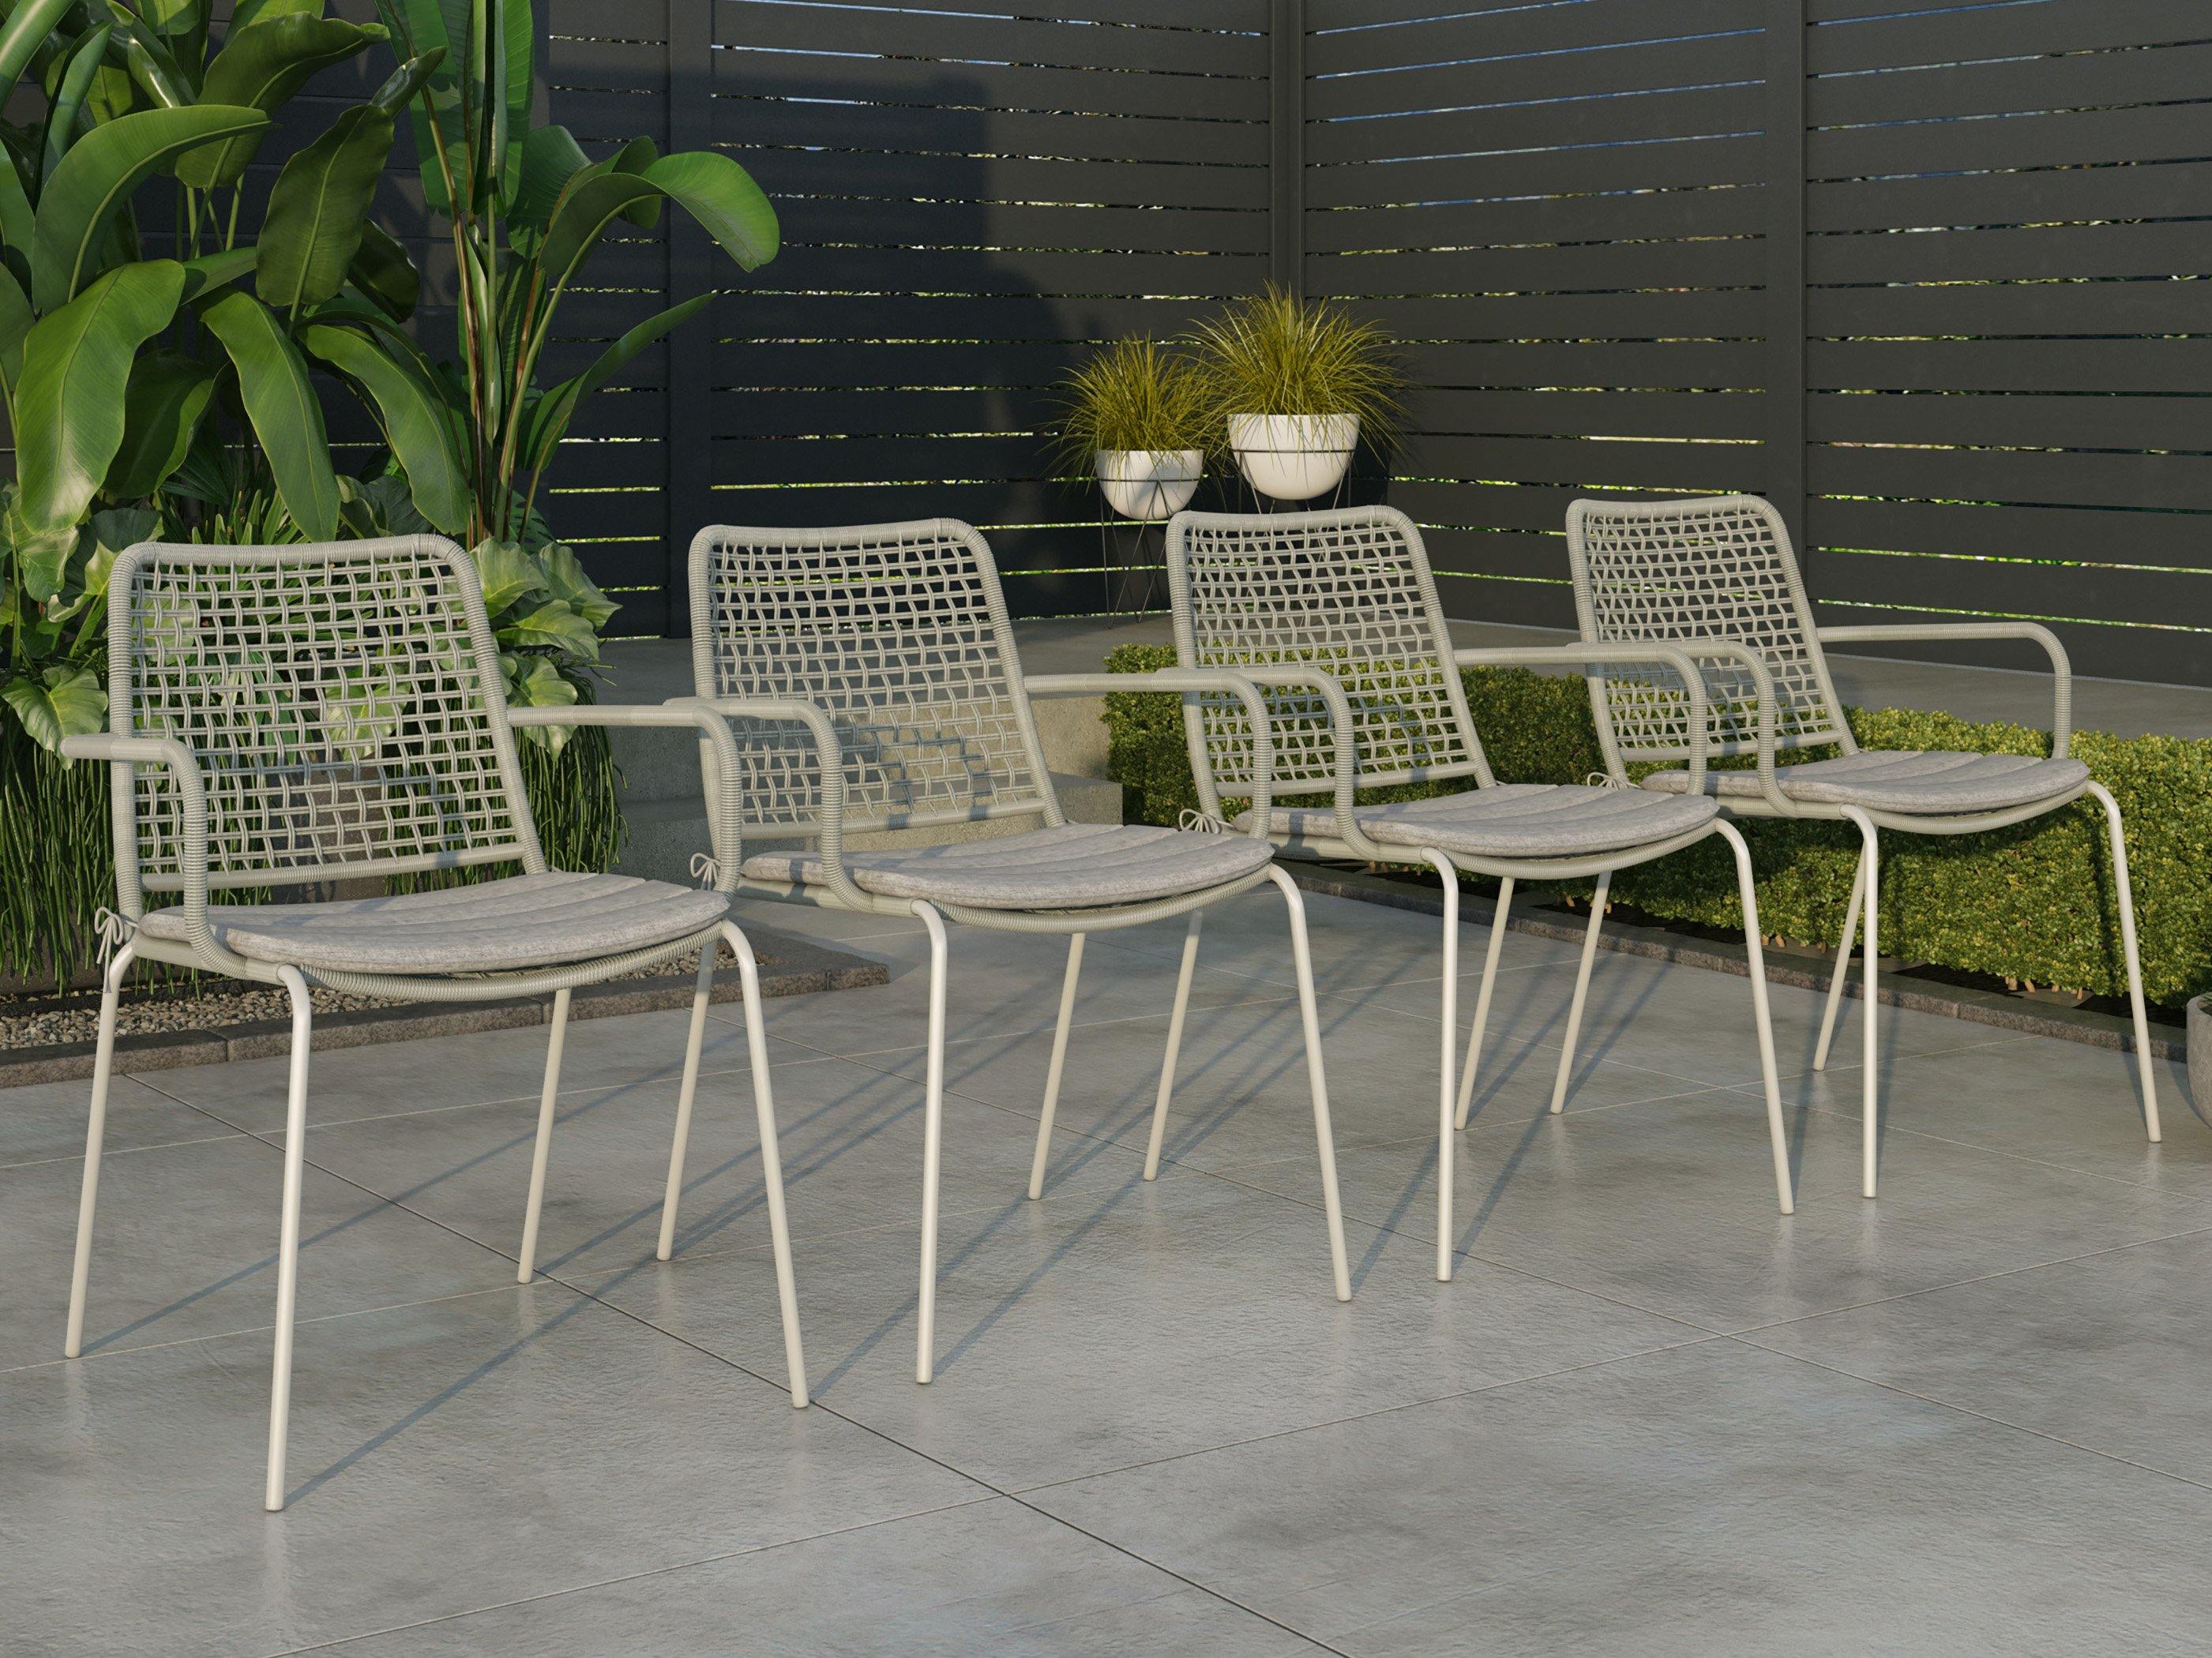 Amazonia Patio Chairs Amazonia 4-Piece Chairs Set | Ideal for Outdoors and Indoors